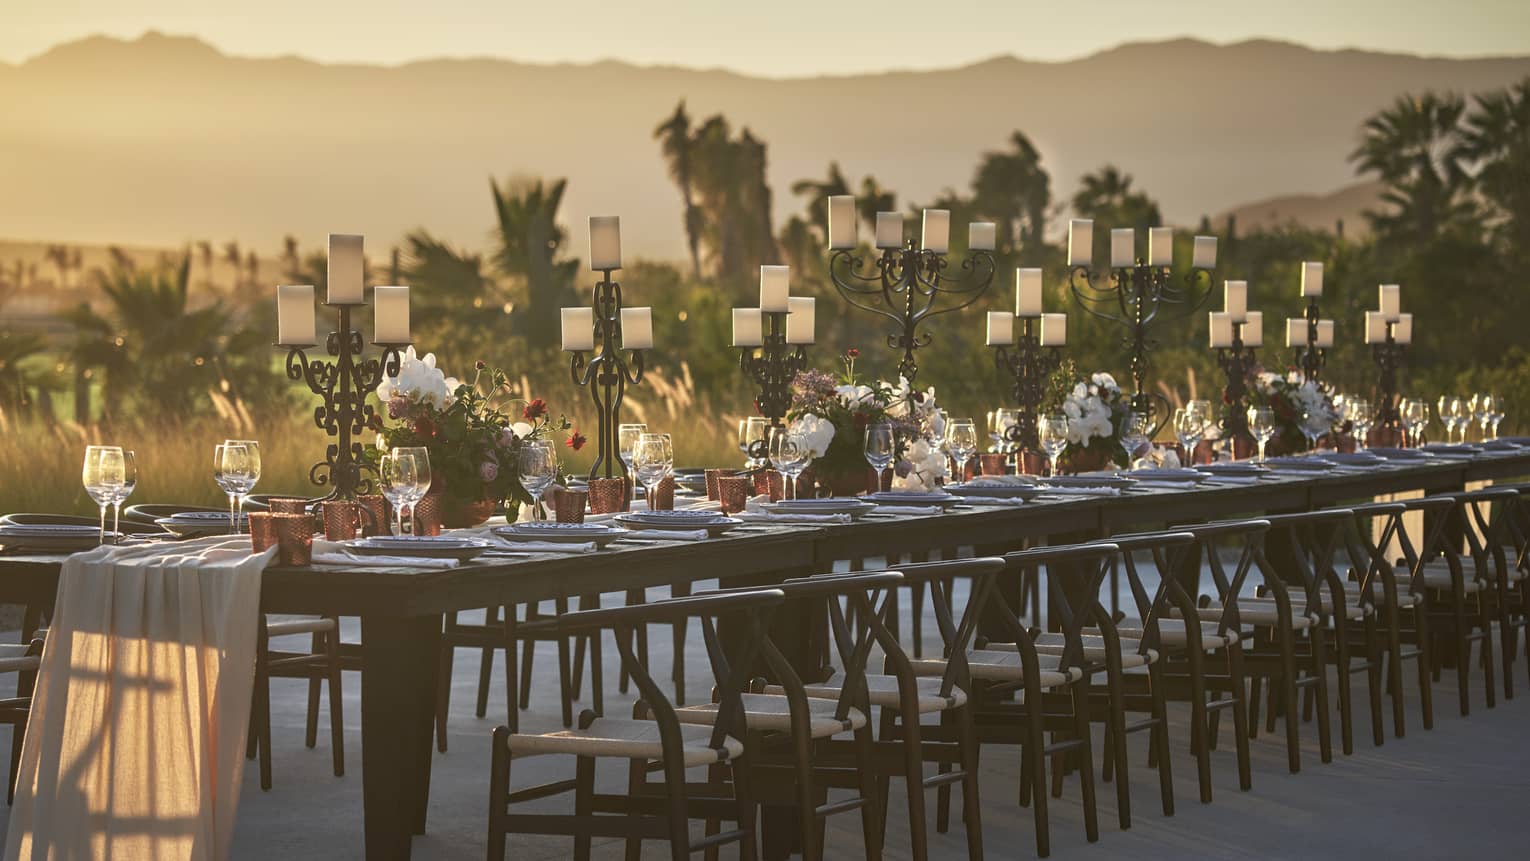 A long dark wood rectangular table is set with a white cloth draped down the center, white dishes and red accents lining the top, dark mid century modern dining chairs tucked in on either side while the sun sets over the mountains in the background